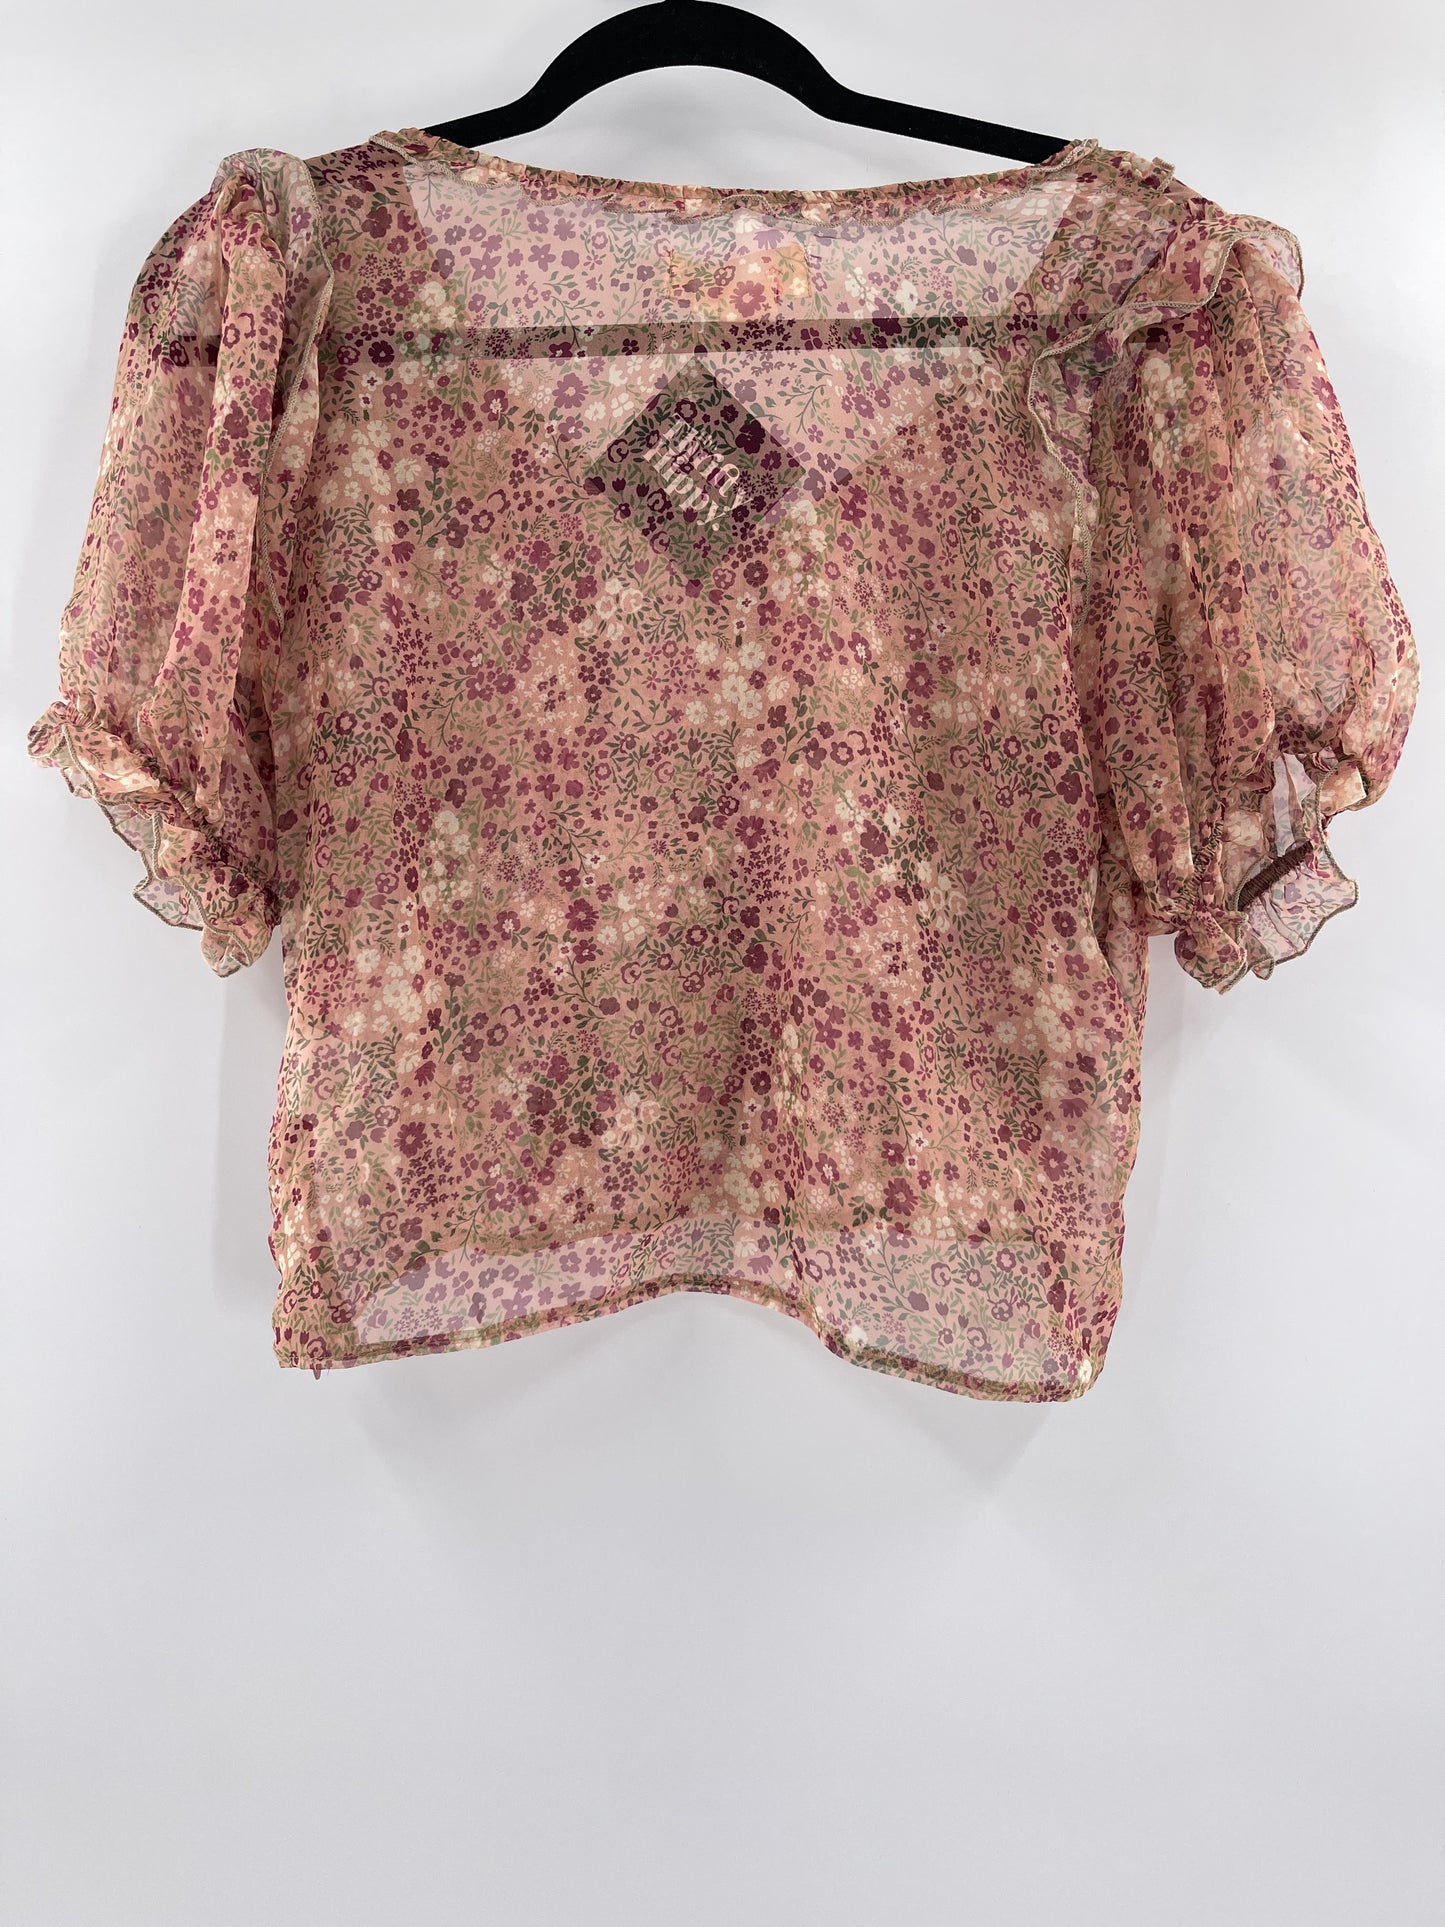 Anthropologie Floral Voile Ruffled Top (Small)